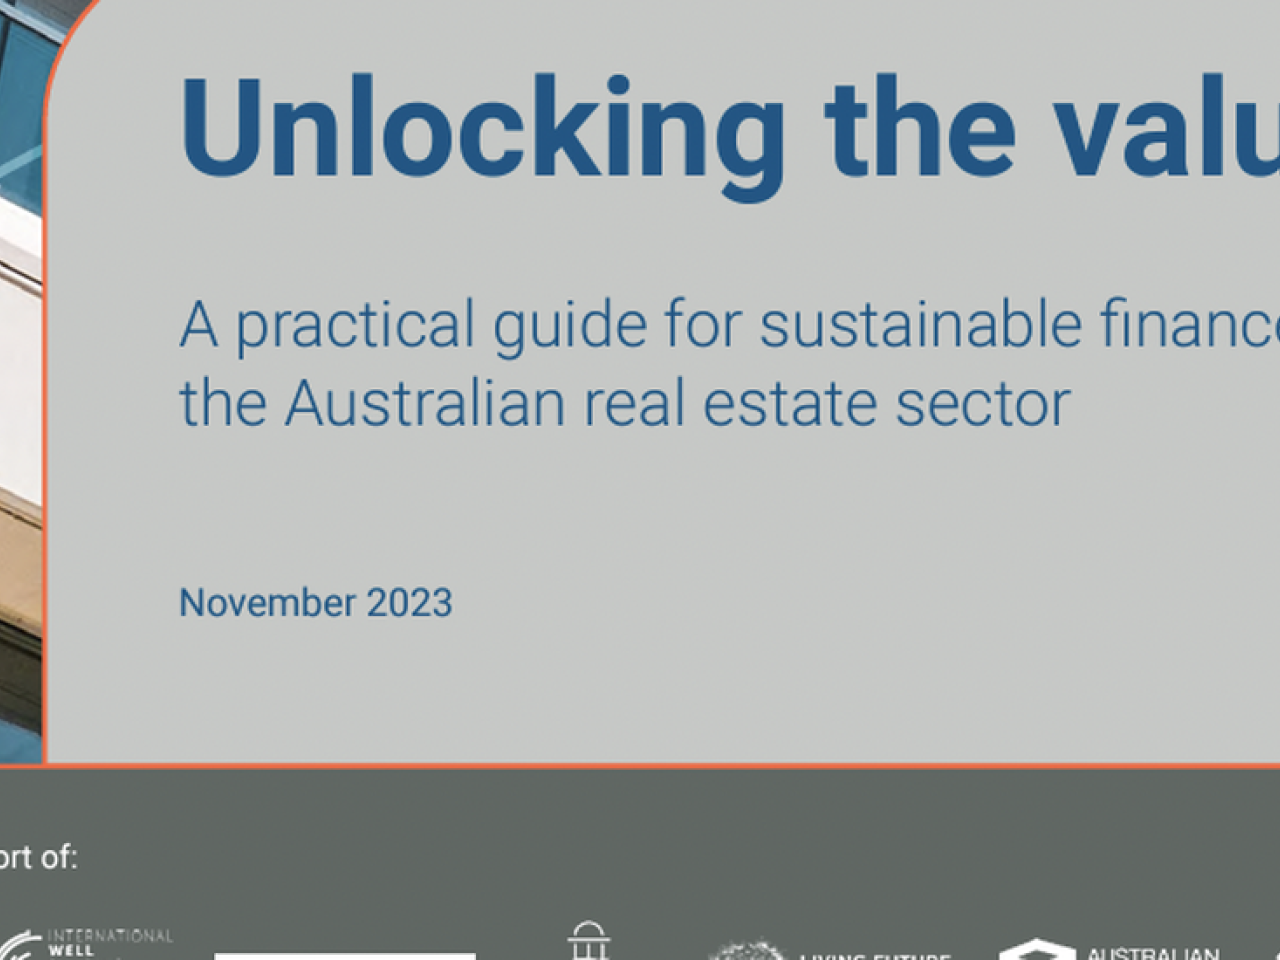 "Unlocking the value. A practical guide for sustainable finance in the Australian real estate sector, November 2023"